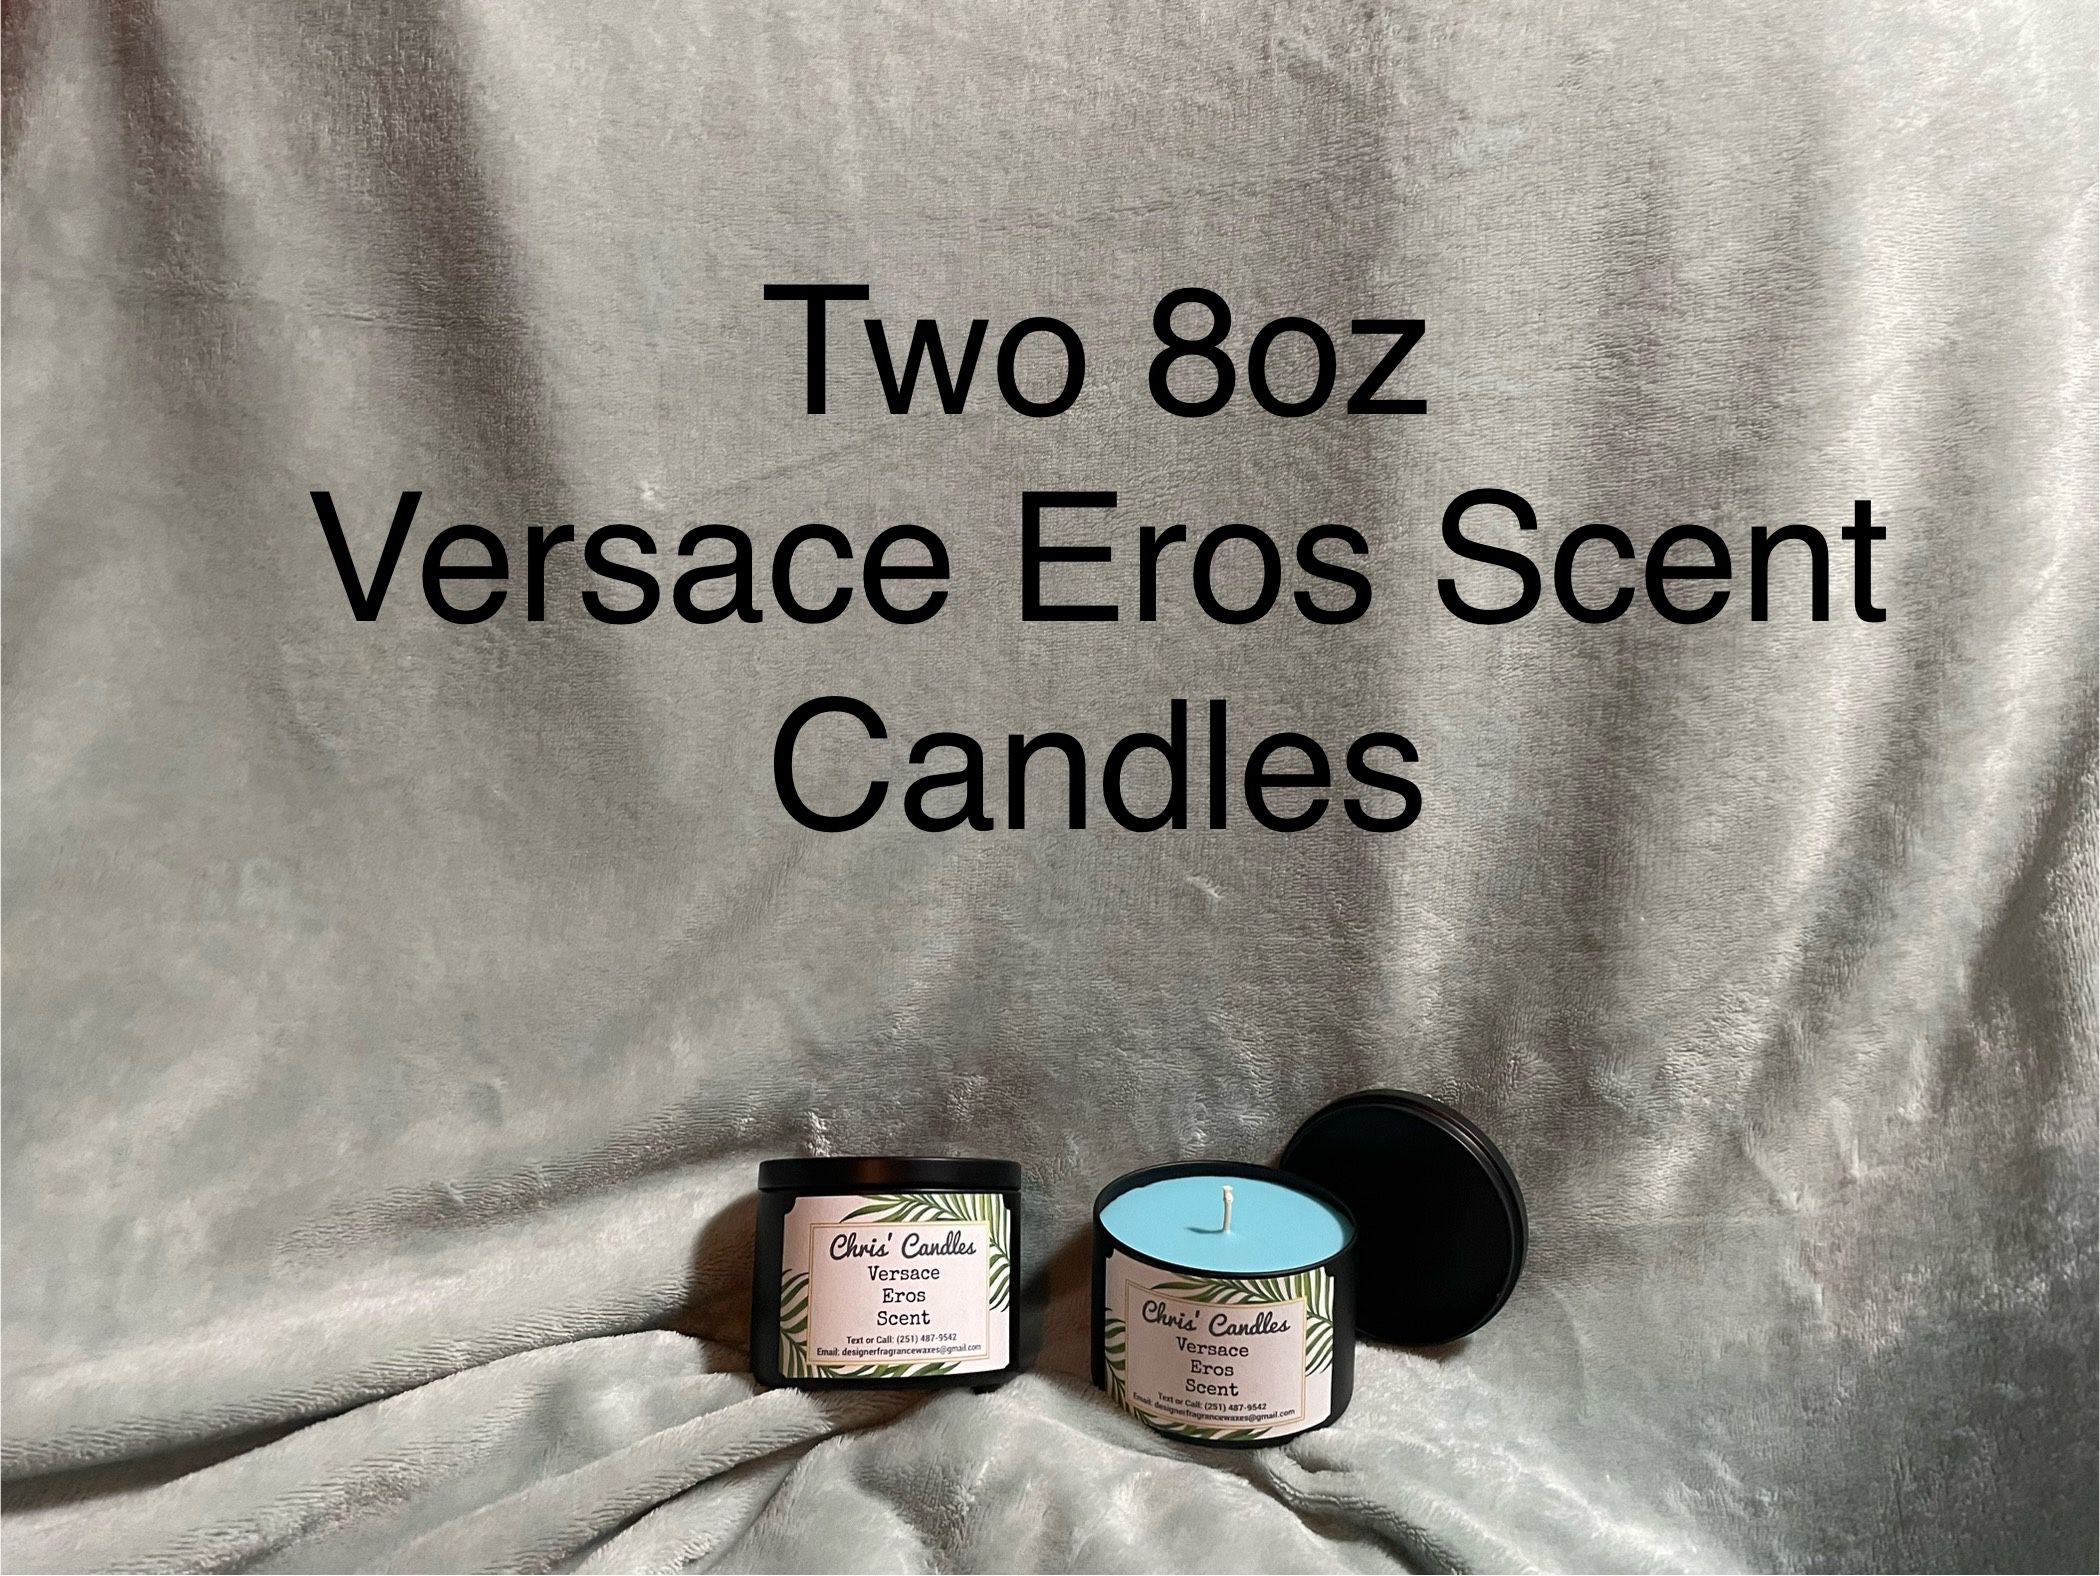 Two 8oz Versace Eros Scent Candles